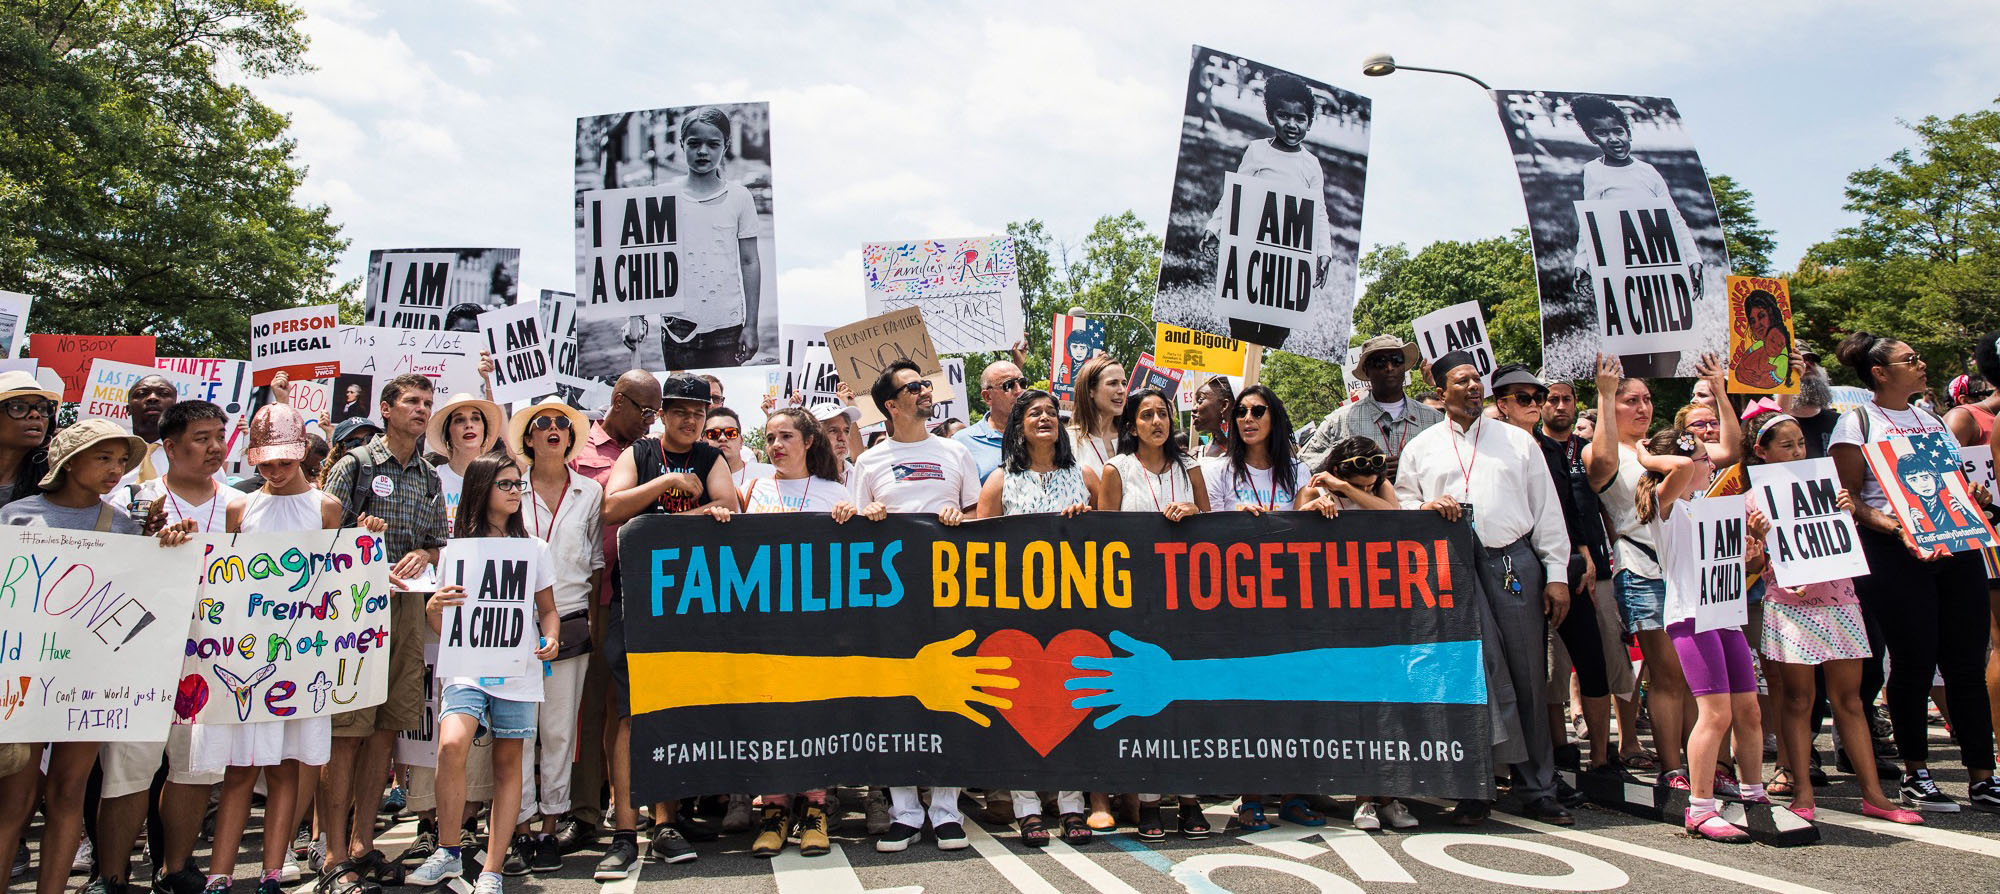 Protesting family separation